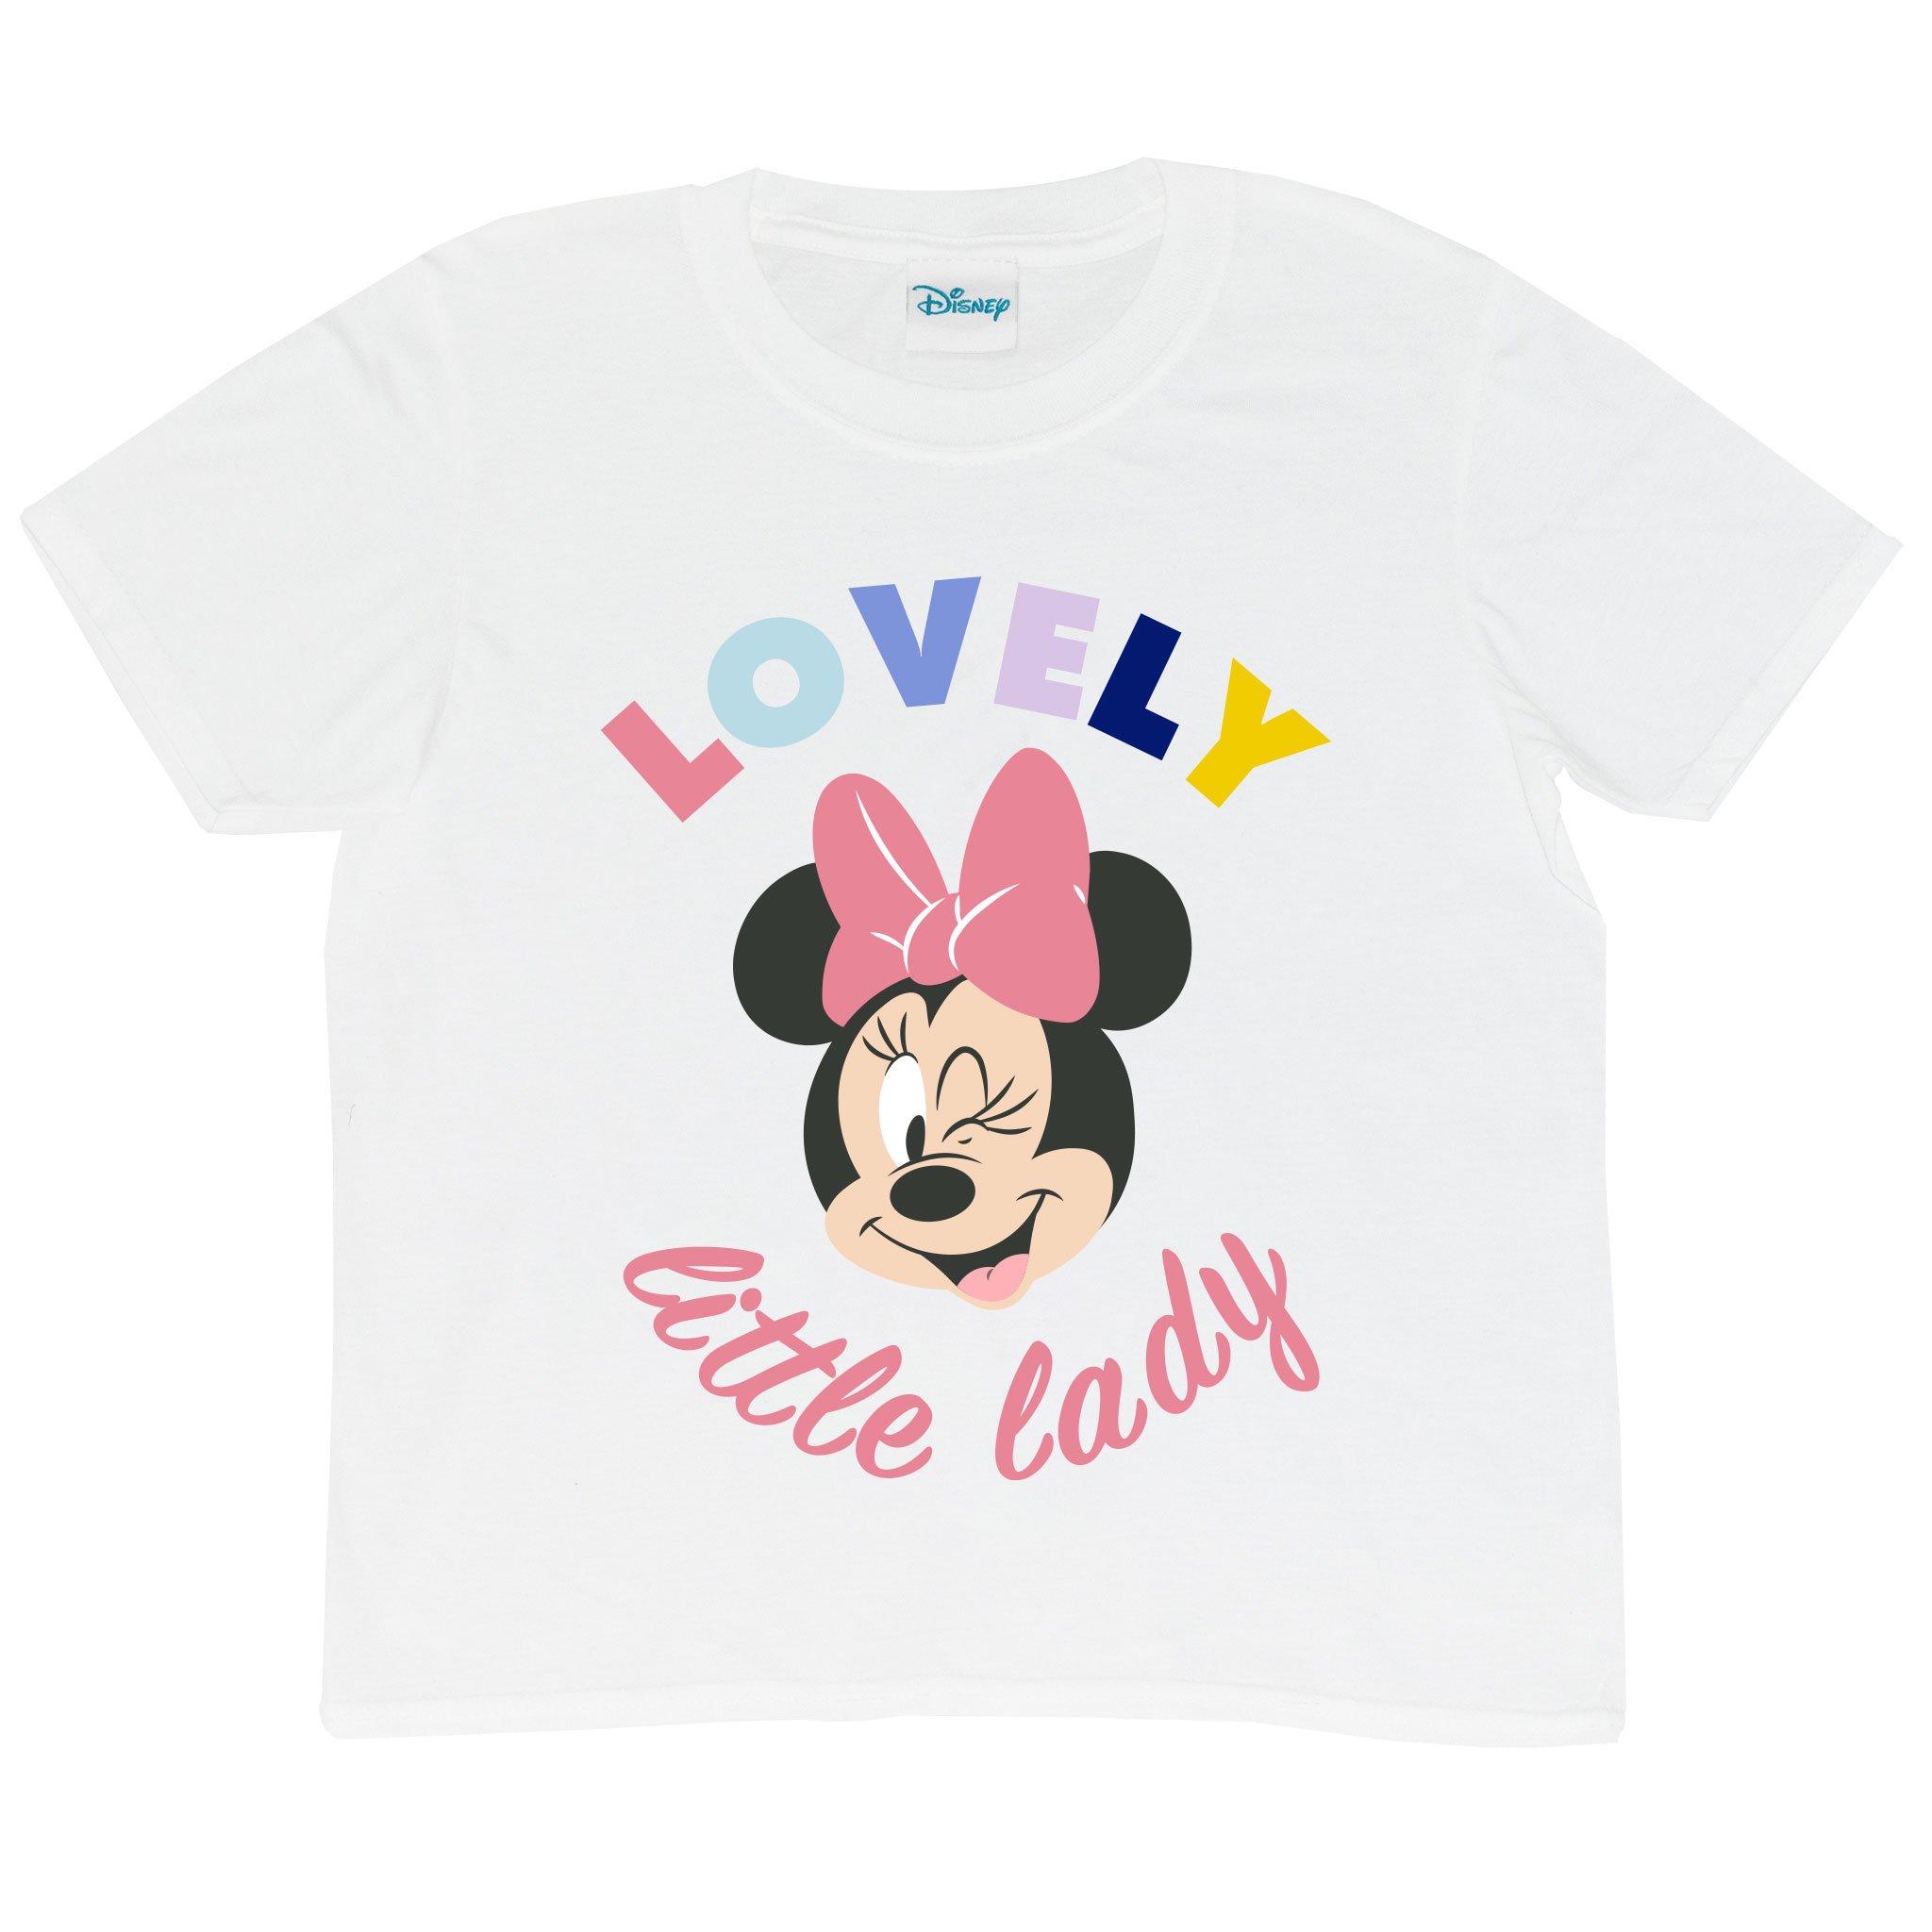 YUMI TOTE BAG: MINNIE MOUSE - EXCLUSIVE FROM DISNEY X